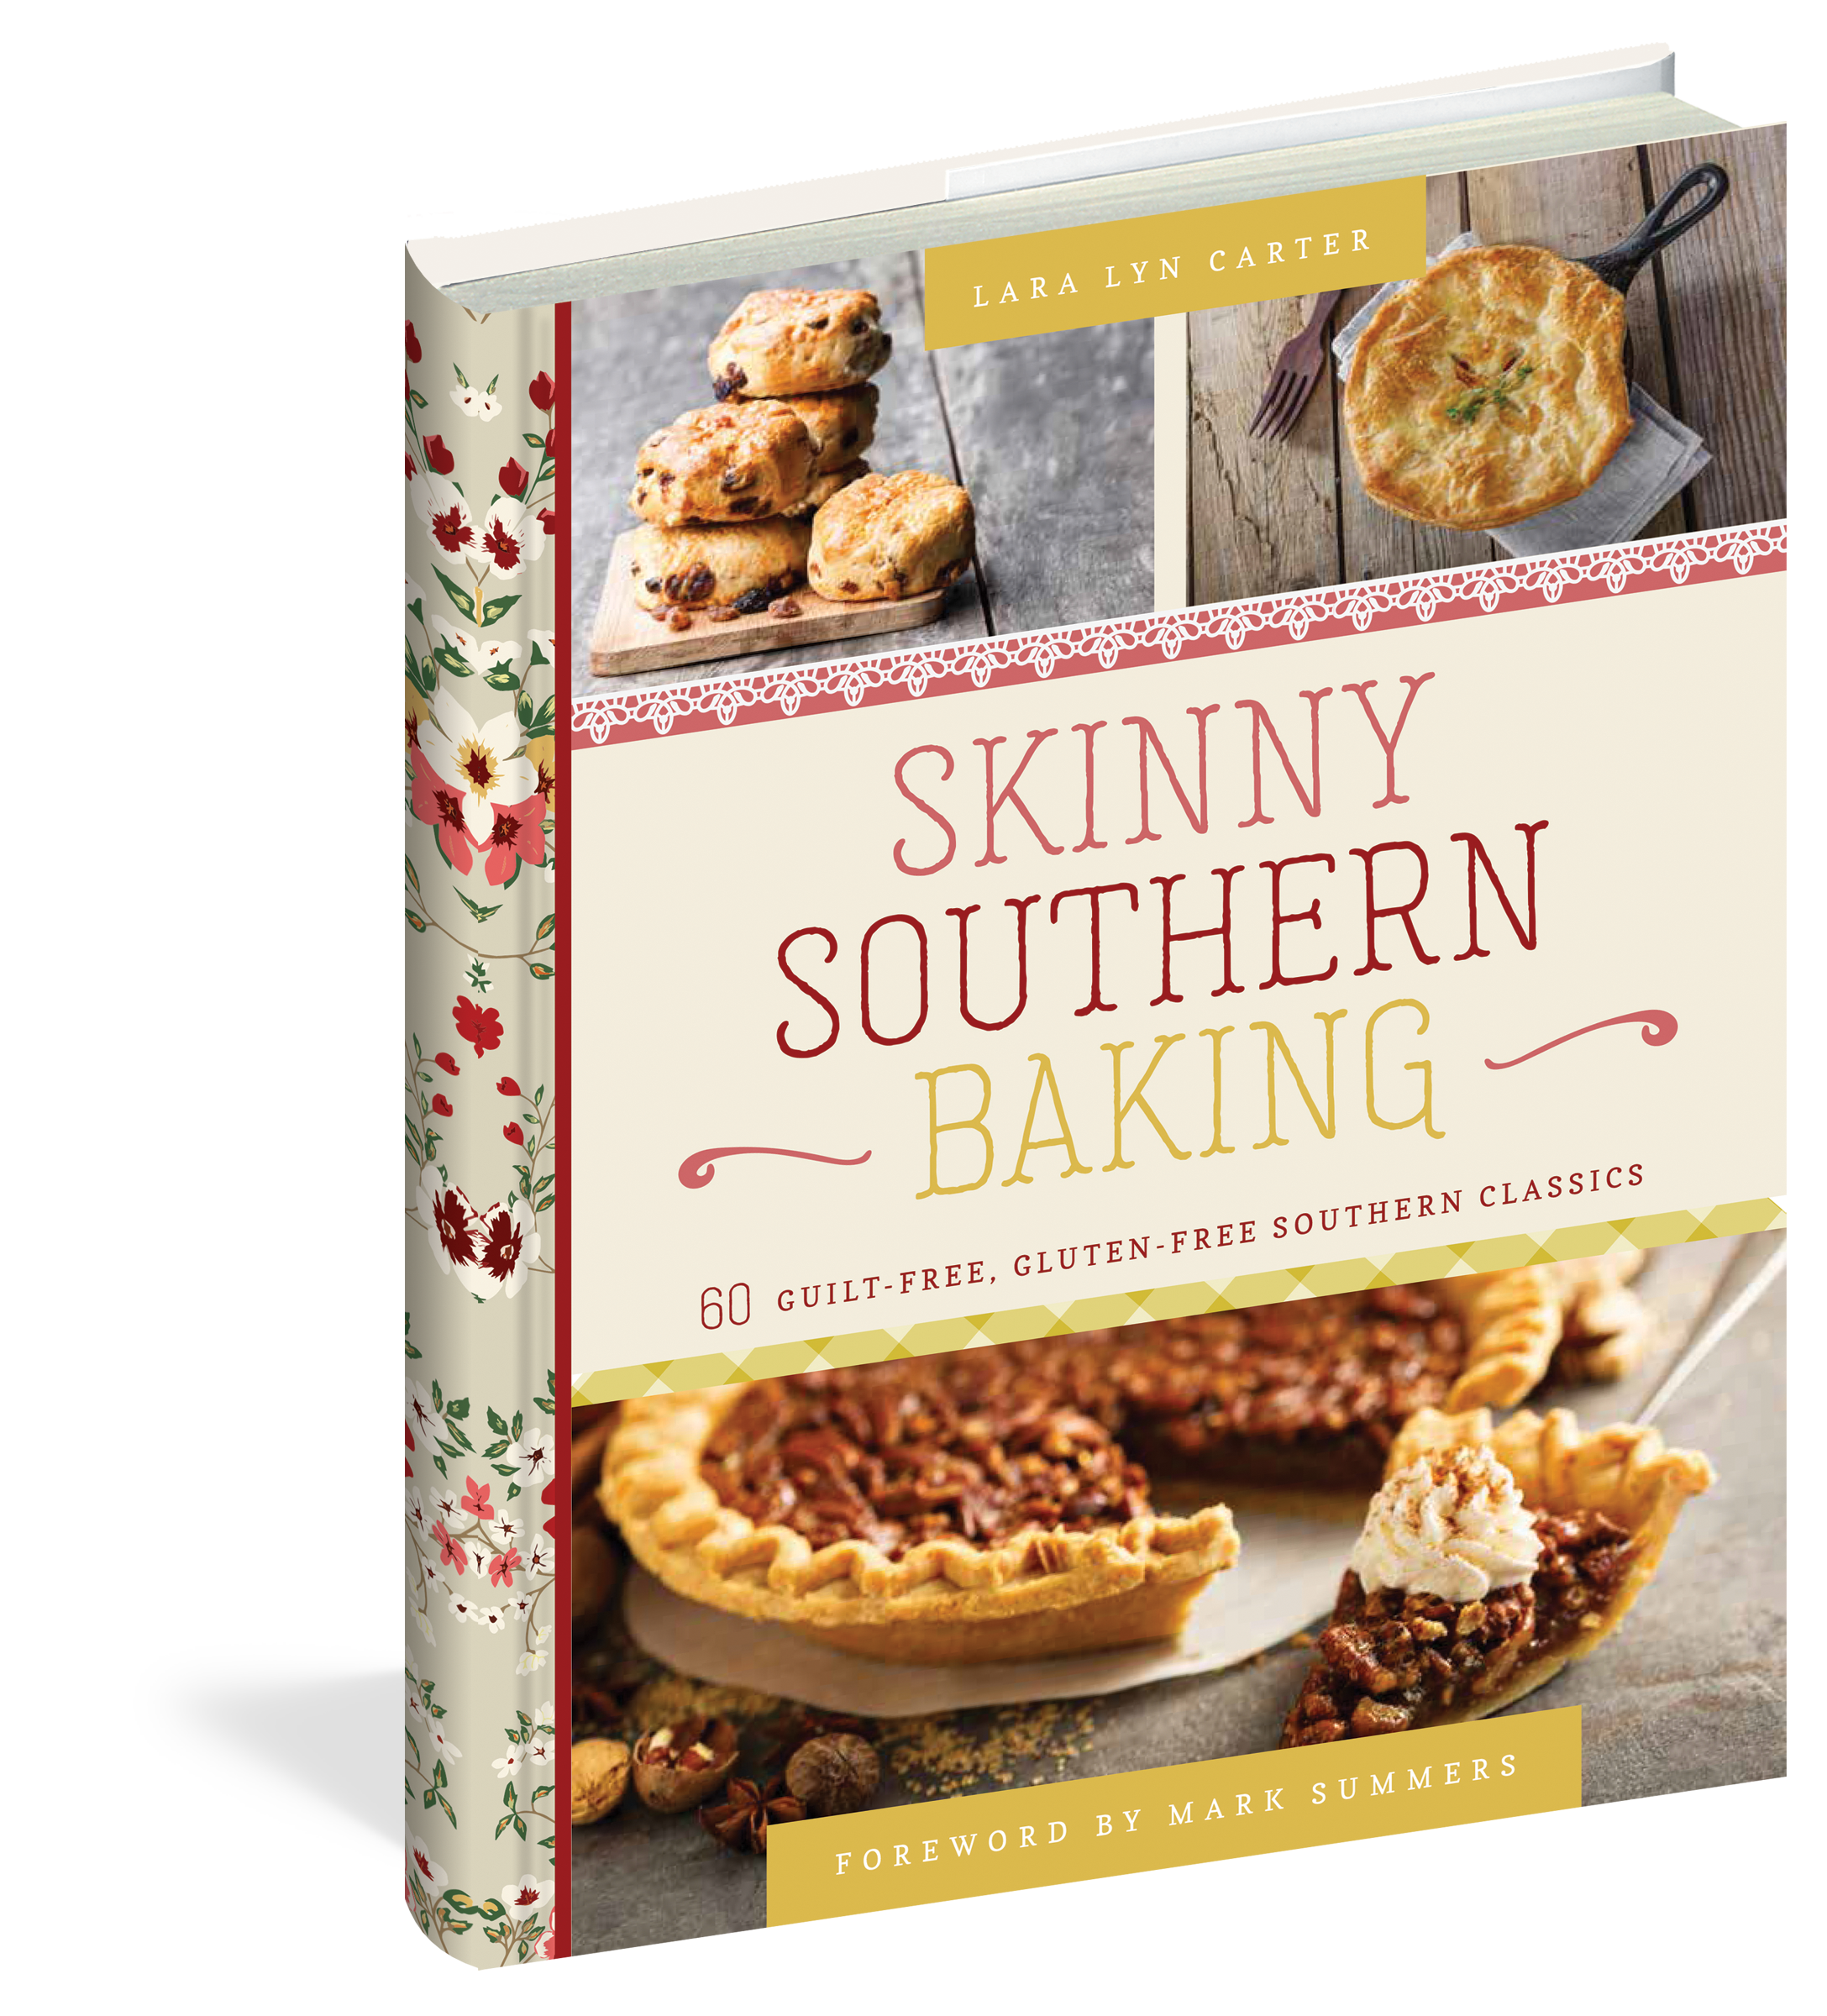 The cover of the cookbook Skinny Southern Baking.